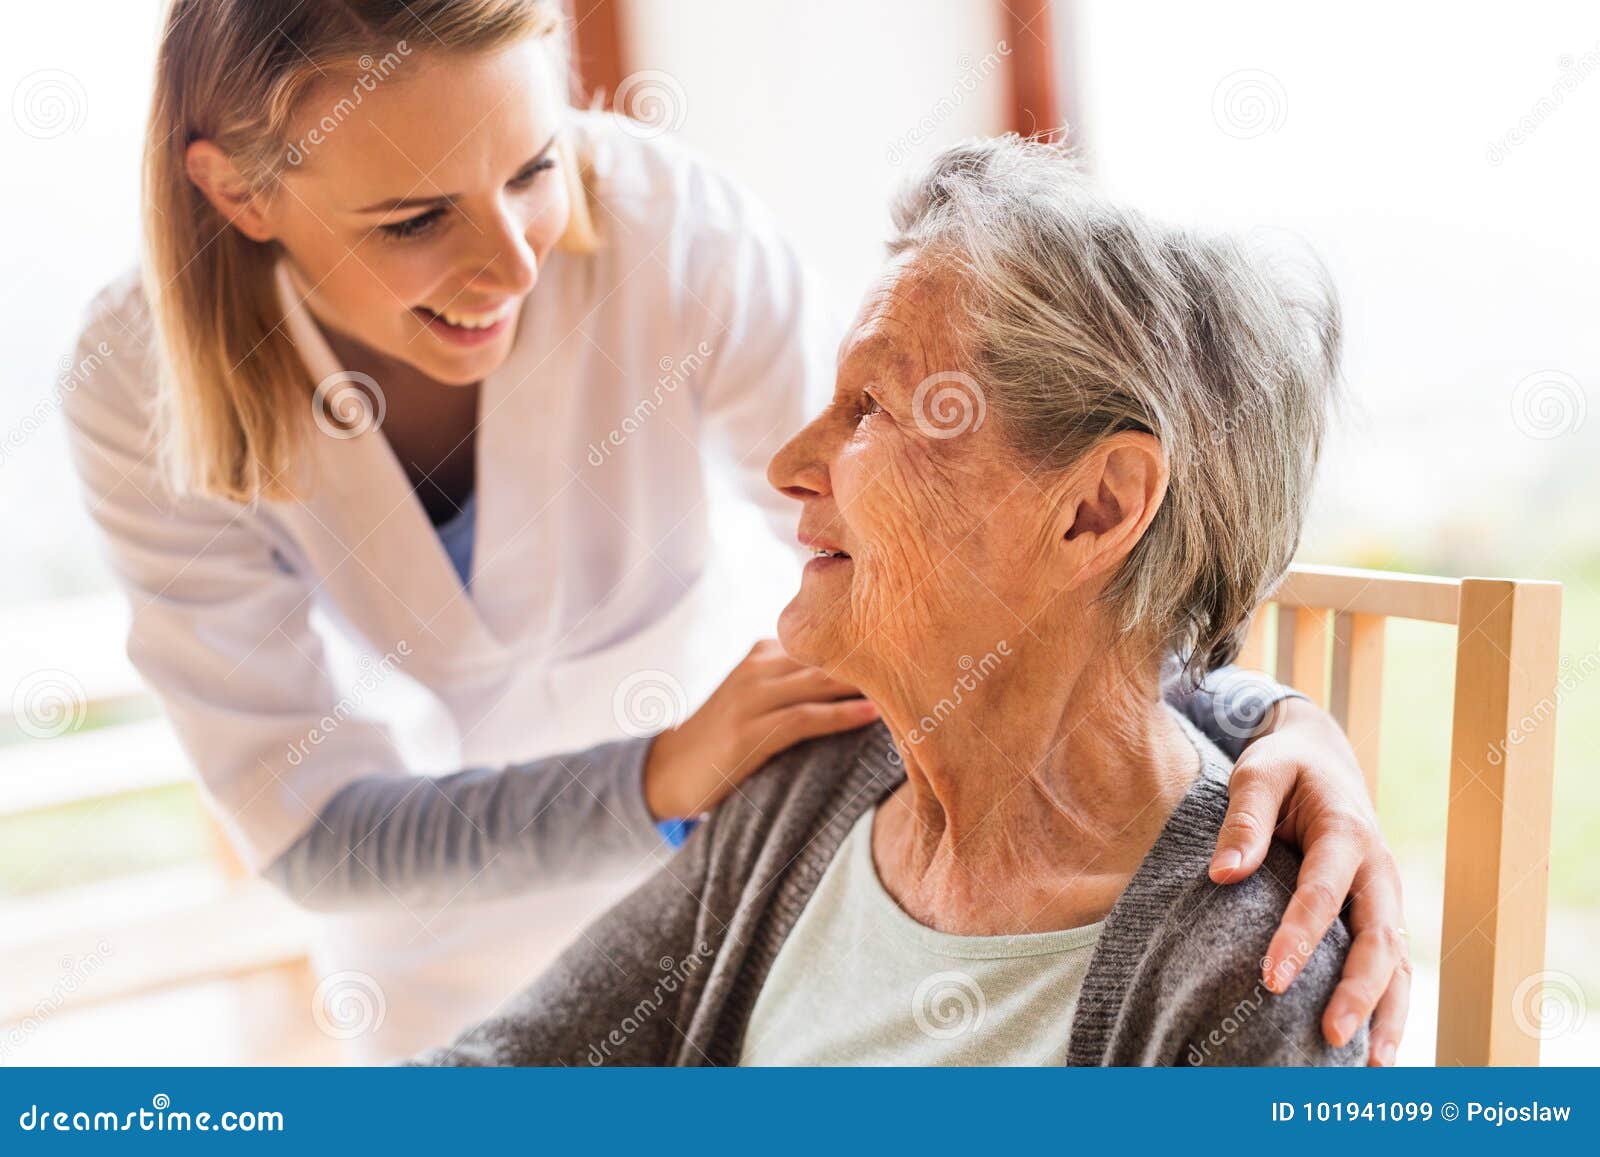 health visitor and a senior woman during home visit.